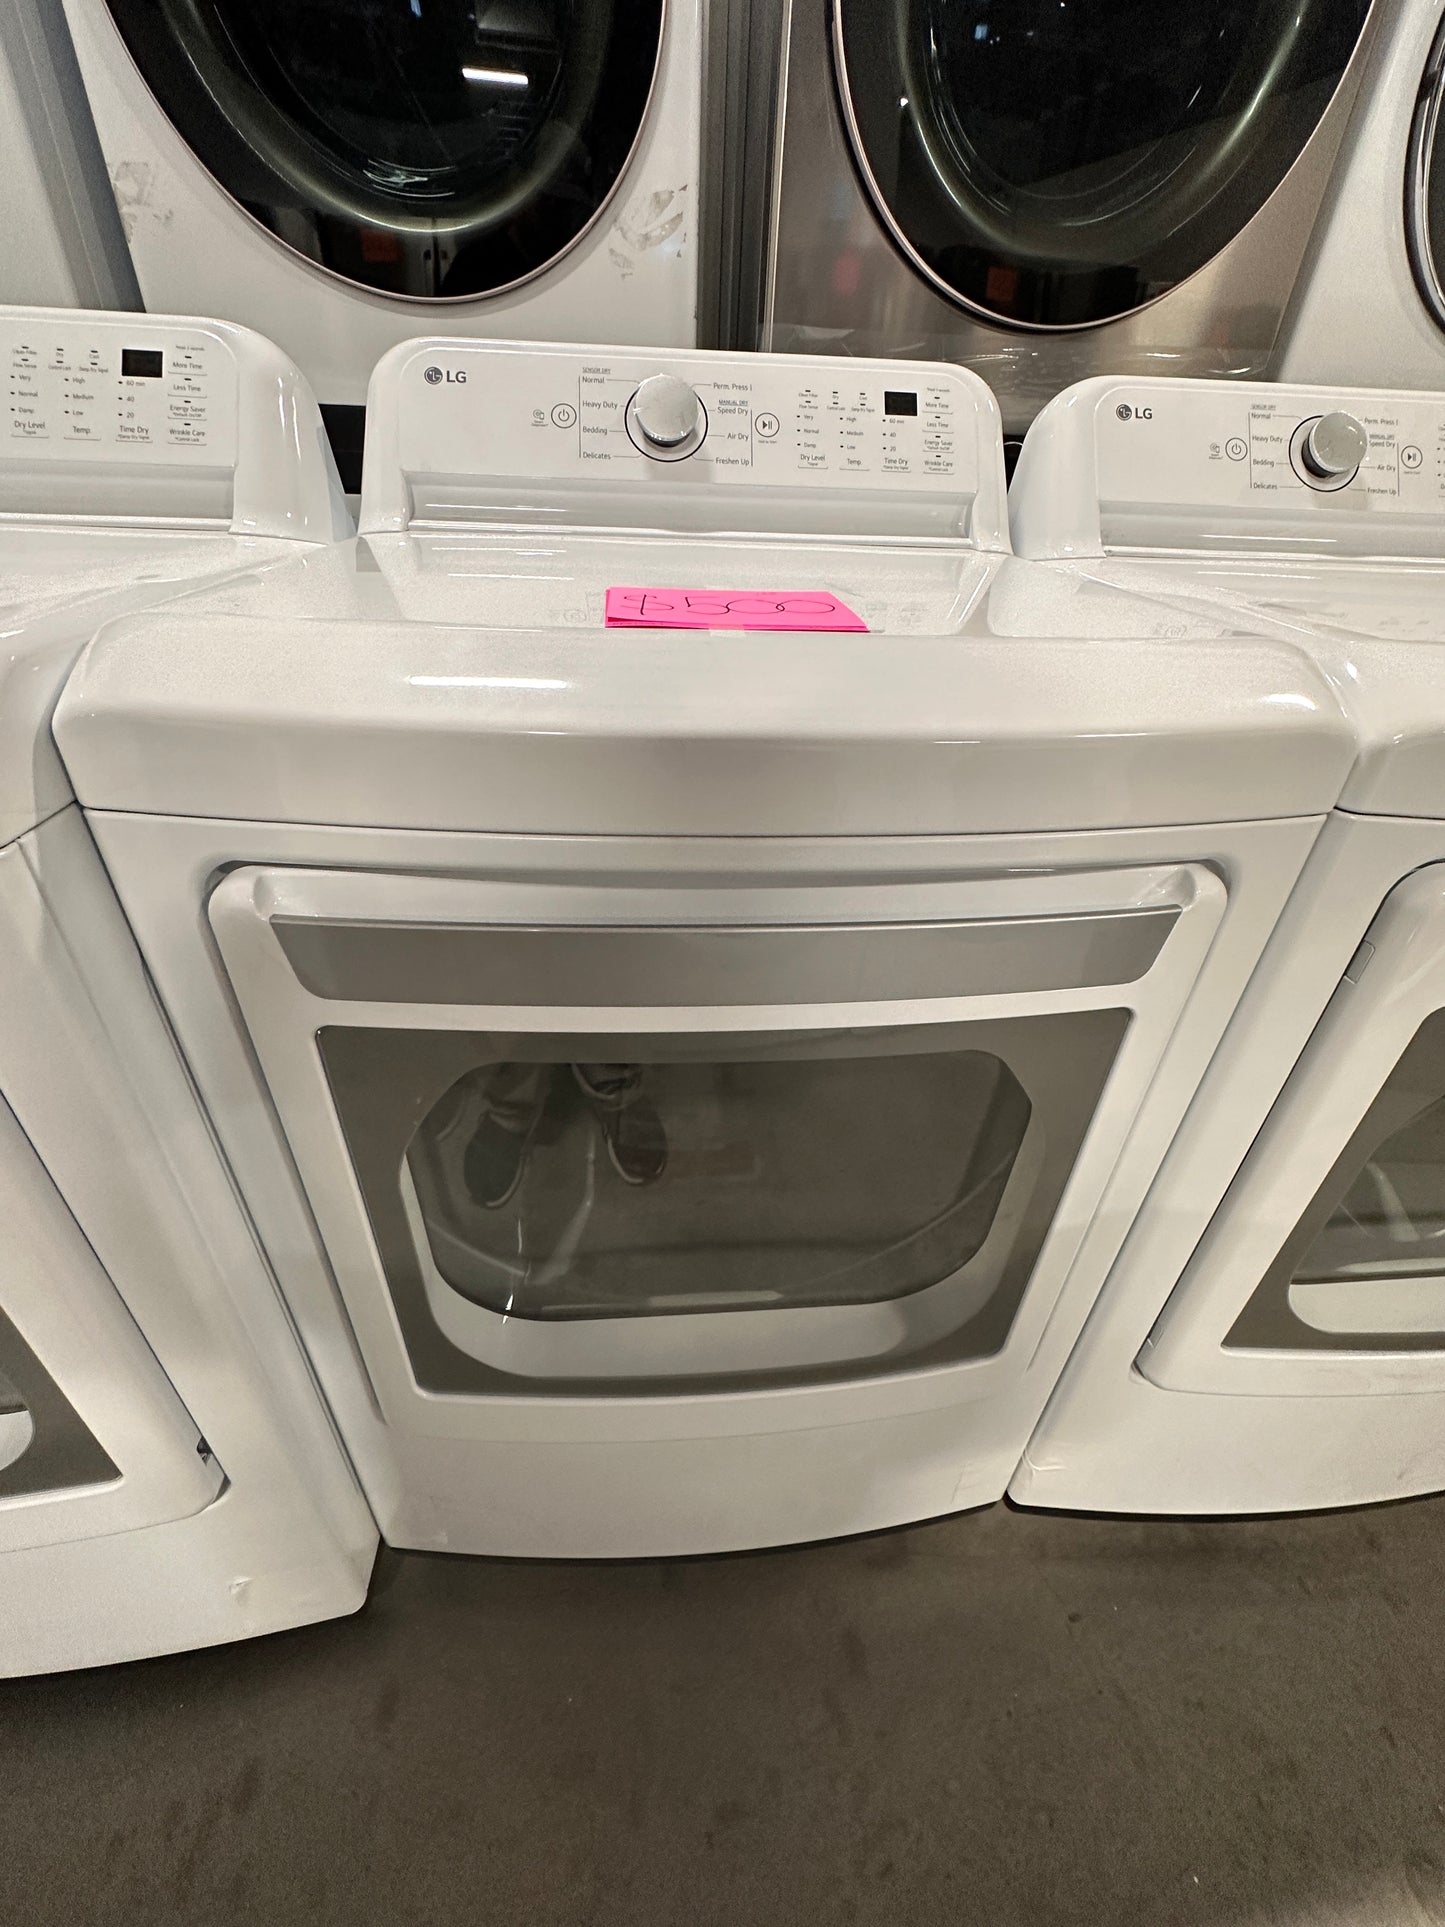 GREAT NEW LG ELECTRIC DRYER - 7.3 CU FT DRYER - DRY12064